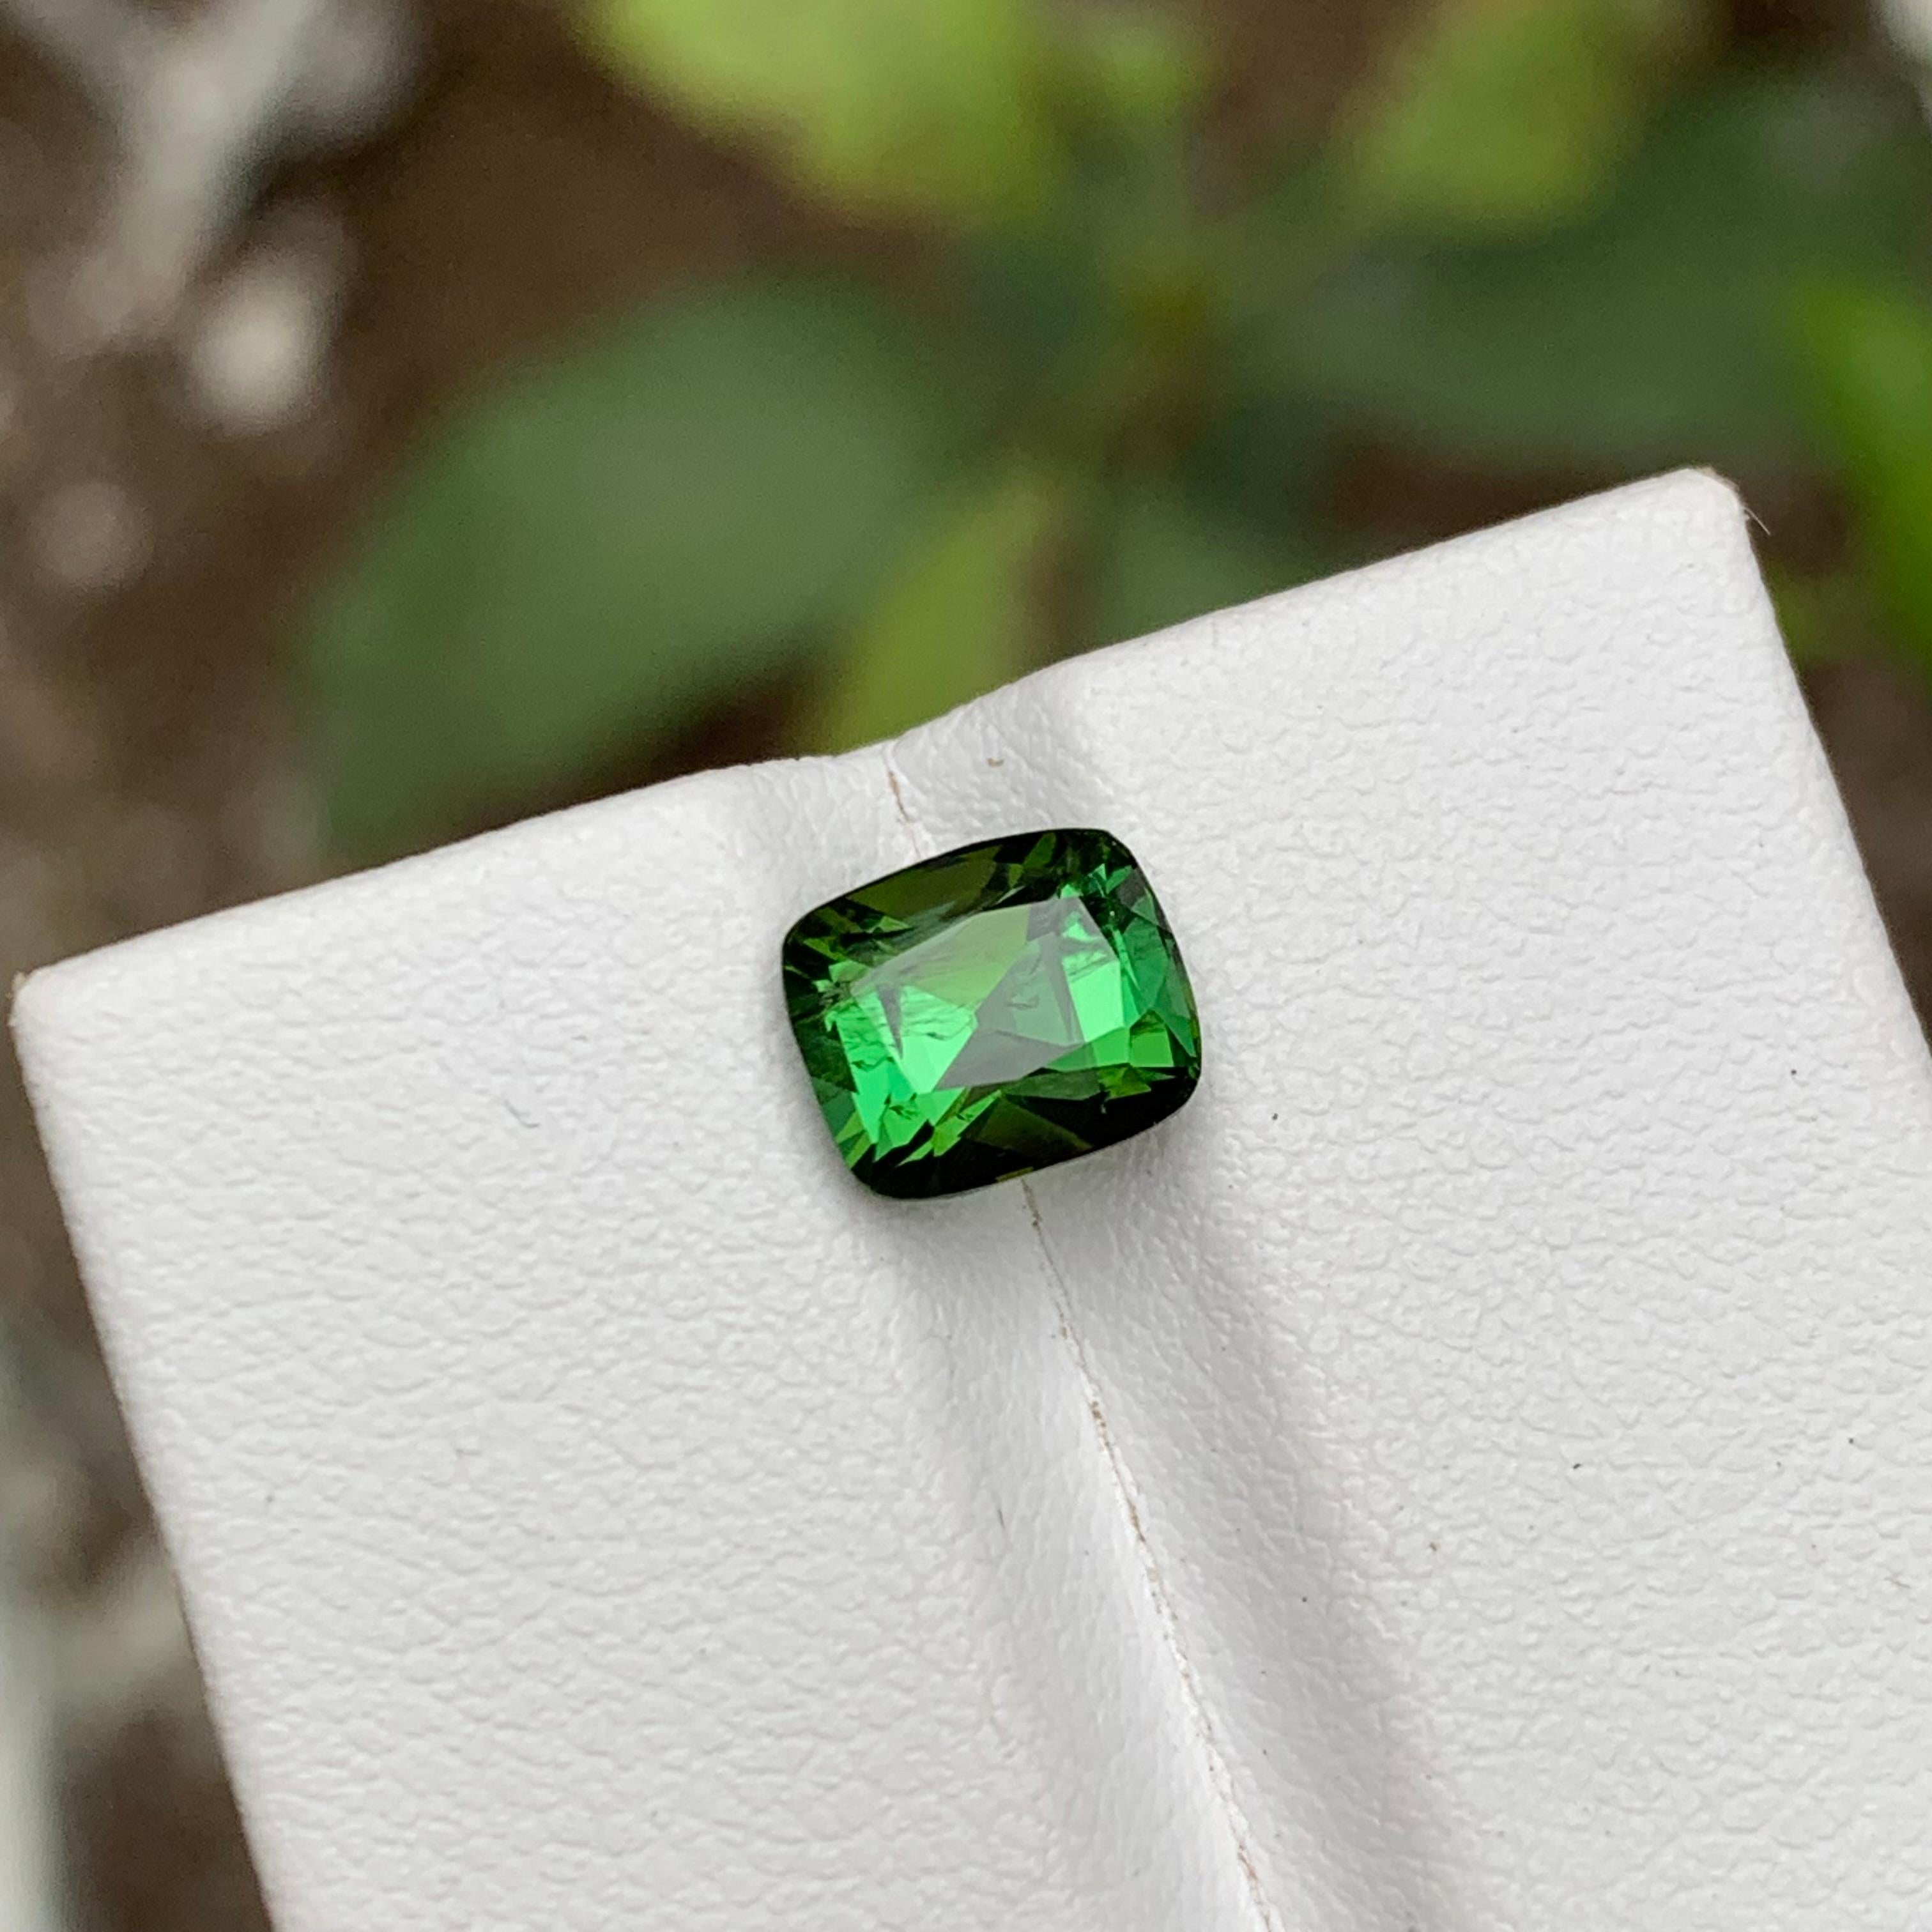 Contemporary Rare Green Natural Tourmaline Loose Gemstone 2.10Ct Cushion Cut for Ring/Jewelry For Sale